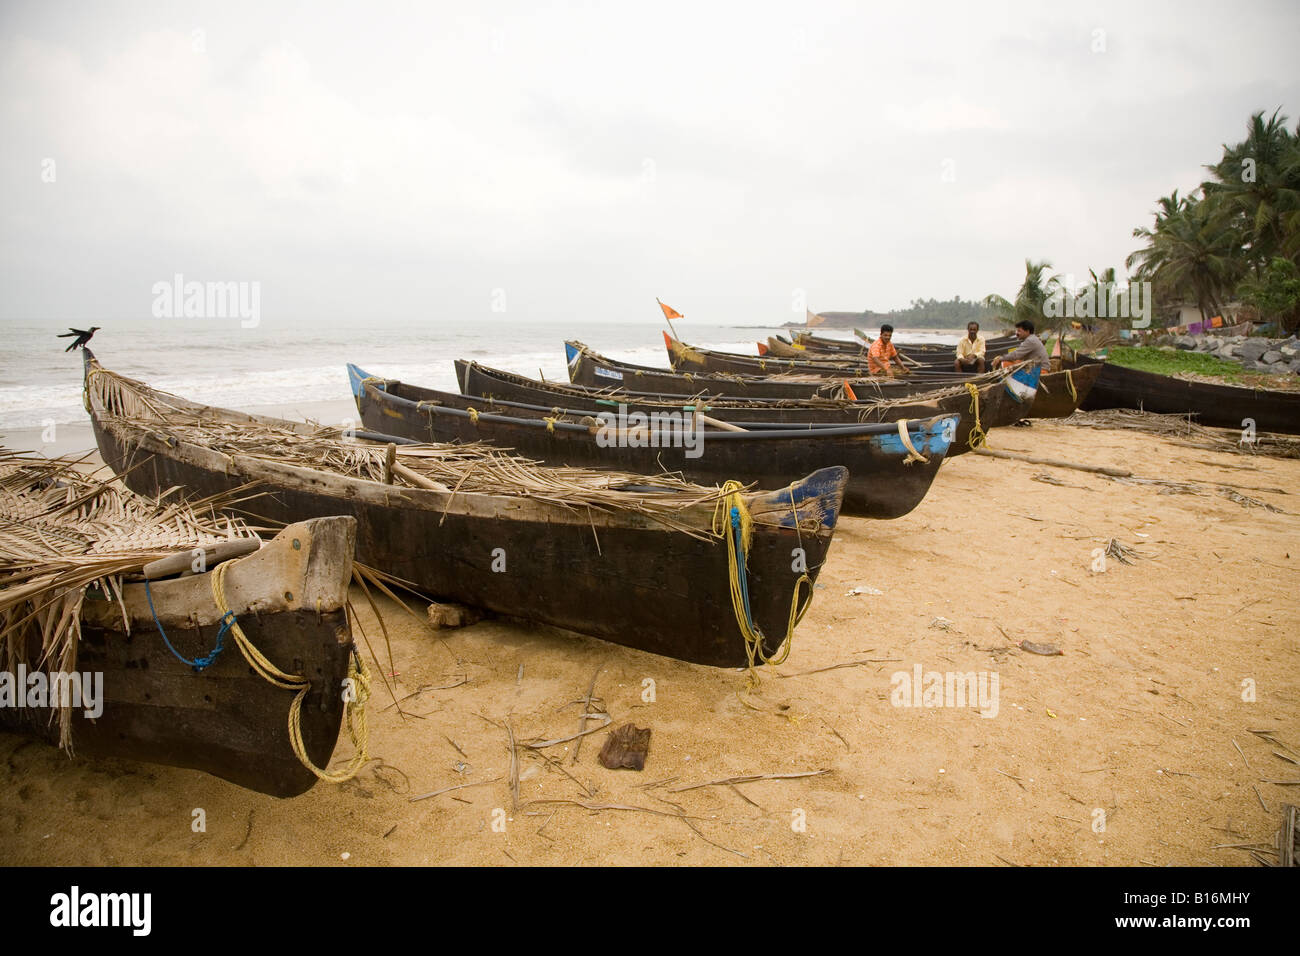 Kappil Beach in Kasaragod, Kerala. Fishing boats are pulled up on the beach. Fishermen sit at their boats. Stock Photo